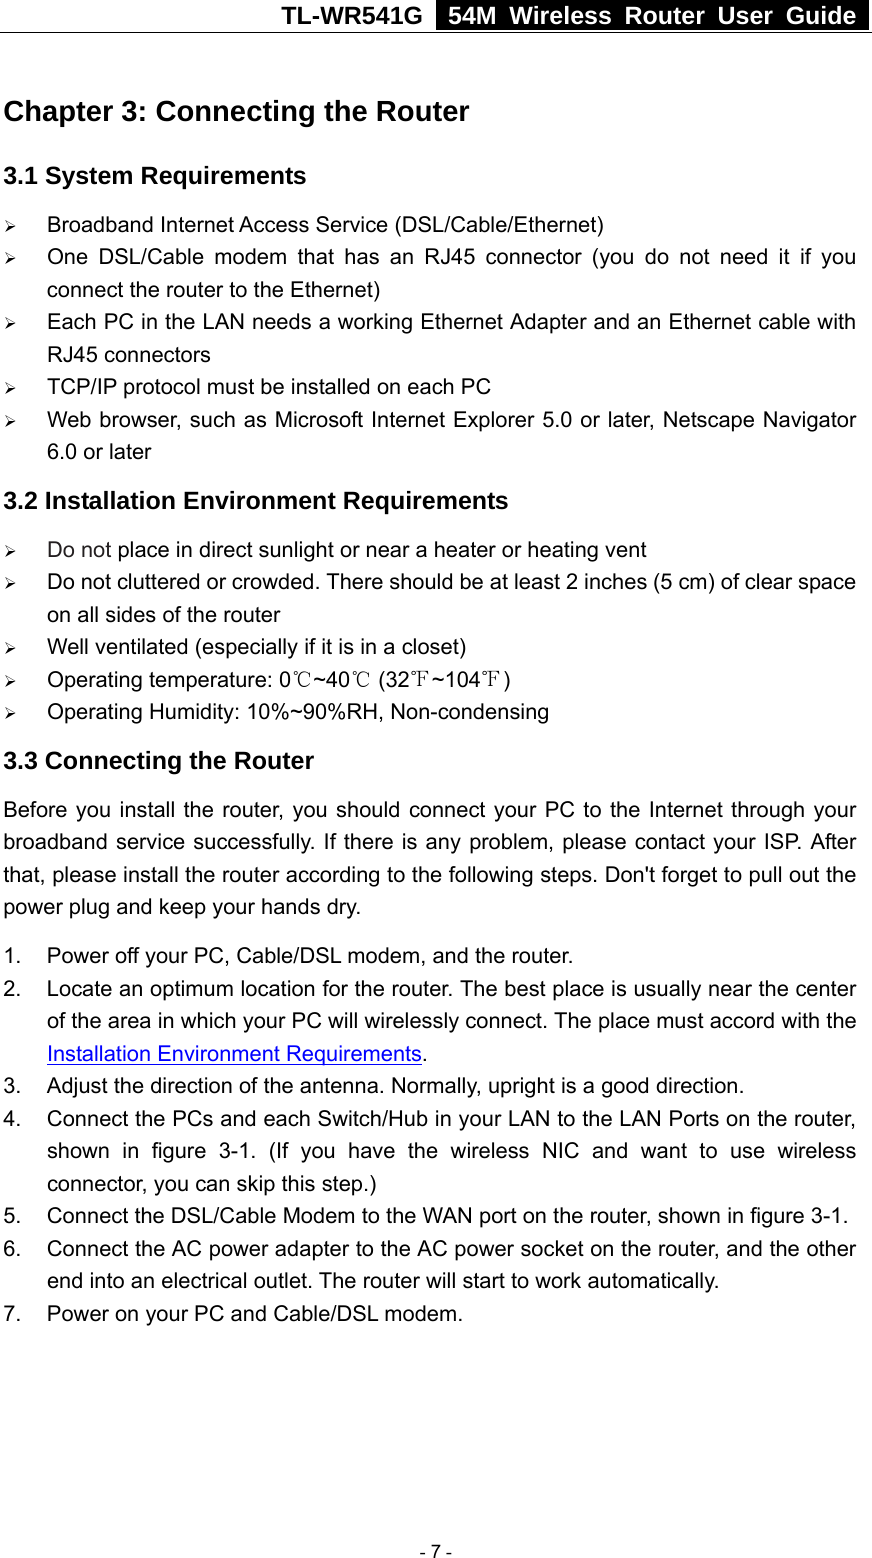 TL-WR541G   54M Wireless Router User Guide  Chapter 3: Connecting the Router 3.1 System Requirements ¾ Broadband Internet Access Service (DSL/Cable/Ethernet) ¾ One DSL/Cable modem that has an RJ45 connector (you do not need it if you connect the router to the Ethernet) ¾ Each PC in the LAN needs a working Ethernet Adapter and an Ethernet cable with RJ45 connectors ¾ TCP/IP protocol must be installed on each PC ¾ Web browser, such as Microsoft Internet Explorer 5.0 or later, Netscape Navigator 6.0 or later 3.2 Installation Environment Requirements ¾ Do not place in direct sunlight or near a heater or heating vent ¾ Do not cluttered or crowded. There should be at least 2 inches (5 cm) of clear space on all sides of the router ¾ Well ventilated (especially if it is in a closet) ¾ Operating temperature: 0 ~40  (32 ~104 )℃℃℉ ℉ ¾ Operating Humidity: 10%~90%RH, Non-condensing 3.3 Connecting the Router Before you install the router, you should connect your PC to the Internet through your broadband service successfully. If there is any problem, please contact your ISP. After that, please install the router according to the following steps. Don&apos;t forget to pull out the power plug and keep your hands dry. 1.  Power off your PC, Cable/DSL modem, and the router. 2.  Locate an optimum location for the router. The best place is usually near the center of the area in which your PC will wirelessly connect. The place must accord with the Installation Environment Requirements. 3.  Adjust the direction of the antenna. Normally, upright is a good direction. 4.  Connect the PCs and each Switch/Hub in your LAN to the LAN Ports on the router, shown in figure 3-1. (If you have the wireless NIC and want to use wireless connector, you can skip this step.) 5. Connect the DSL/Cable Modem to the WAN port on the router, shown in figure 3-1. 6.  Connect the AC power adapter to the AC power socket on the router, and the other end into an electrical outlet. The router will start to work automatically. 7.  Power on your PC and Cable/DSL modem.   - 7 - 